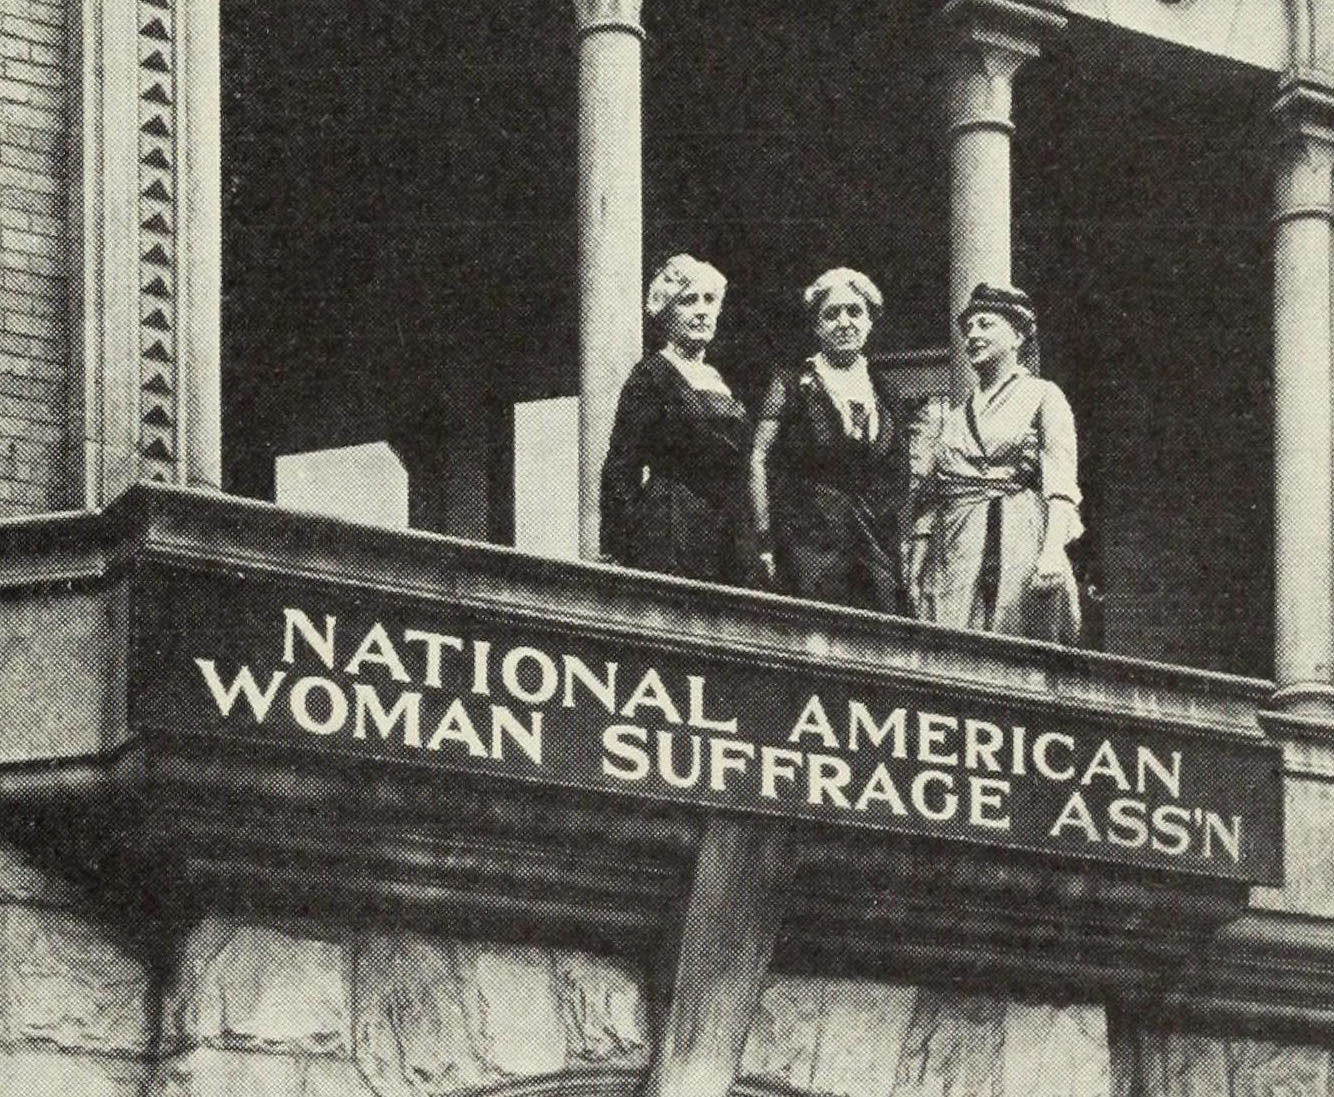 Suffragettes on the balcony of the National American Woman Suffrage Association building.